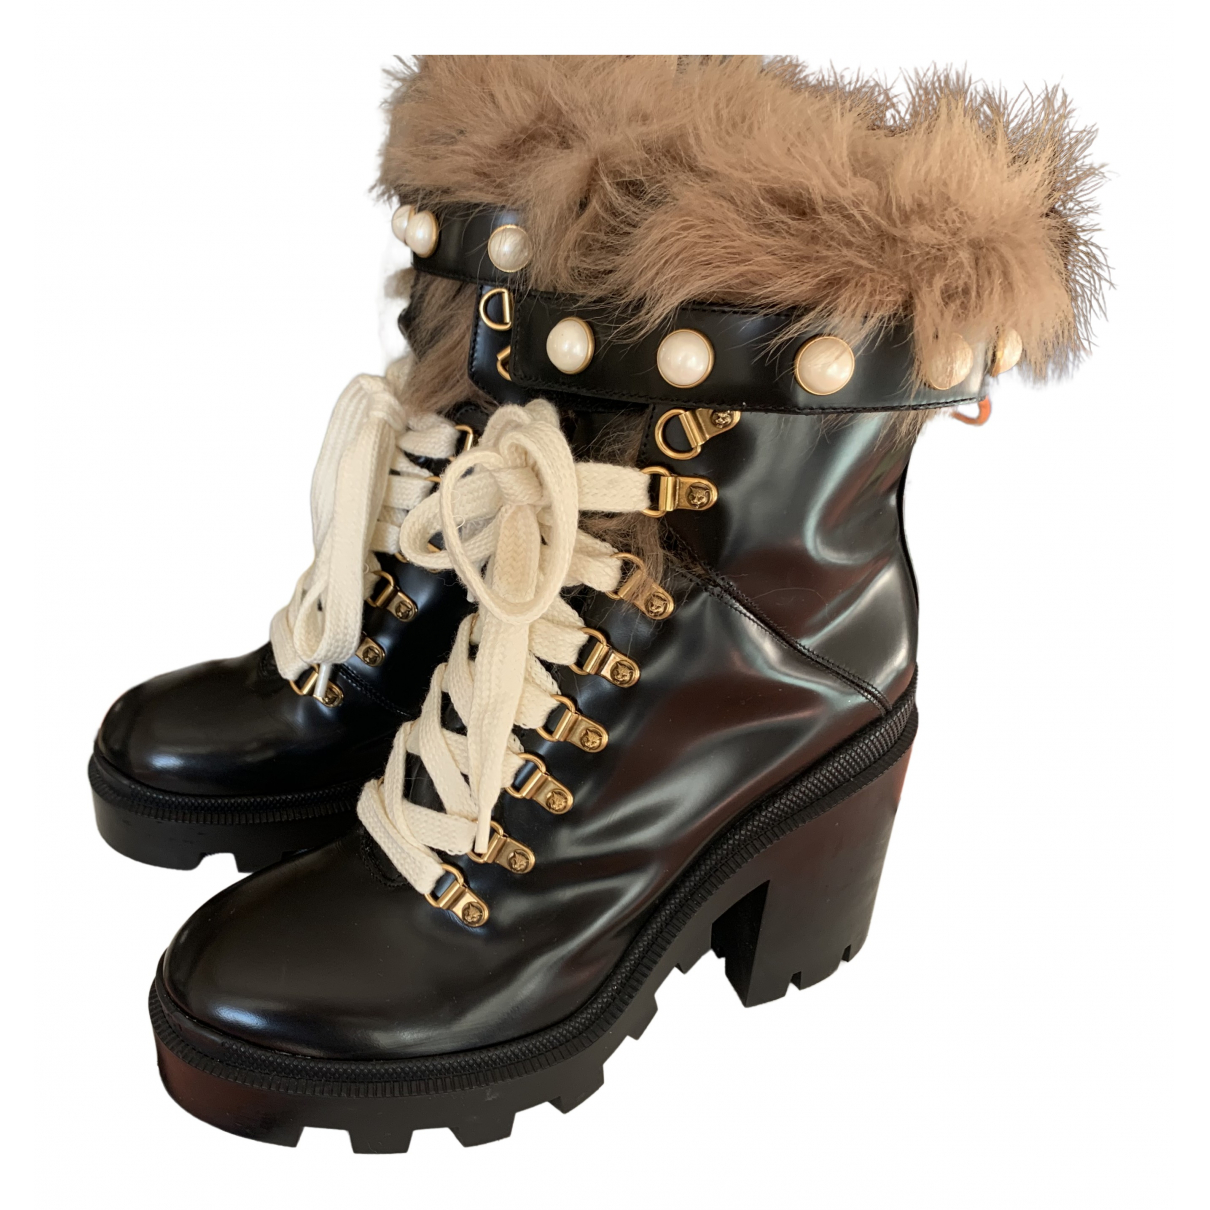 Fixed price for sale Sylvie leather lace up Safety and trust boots